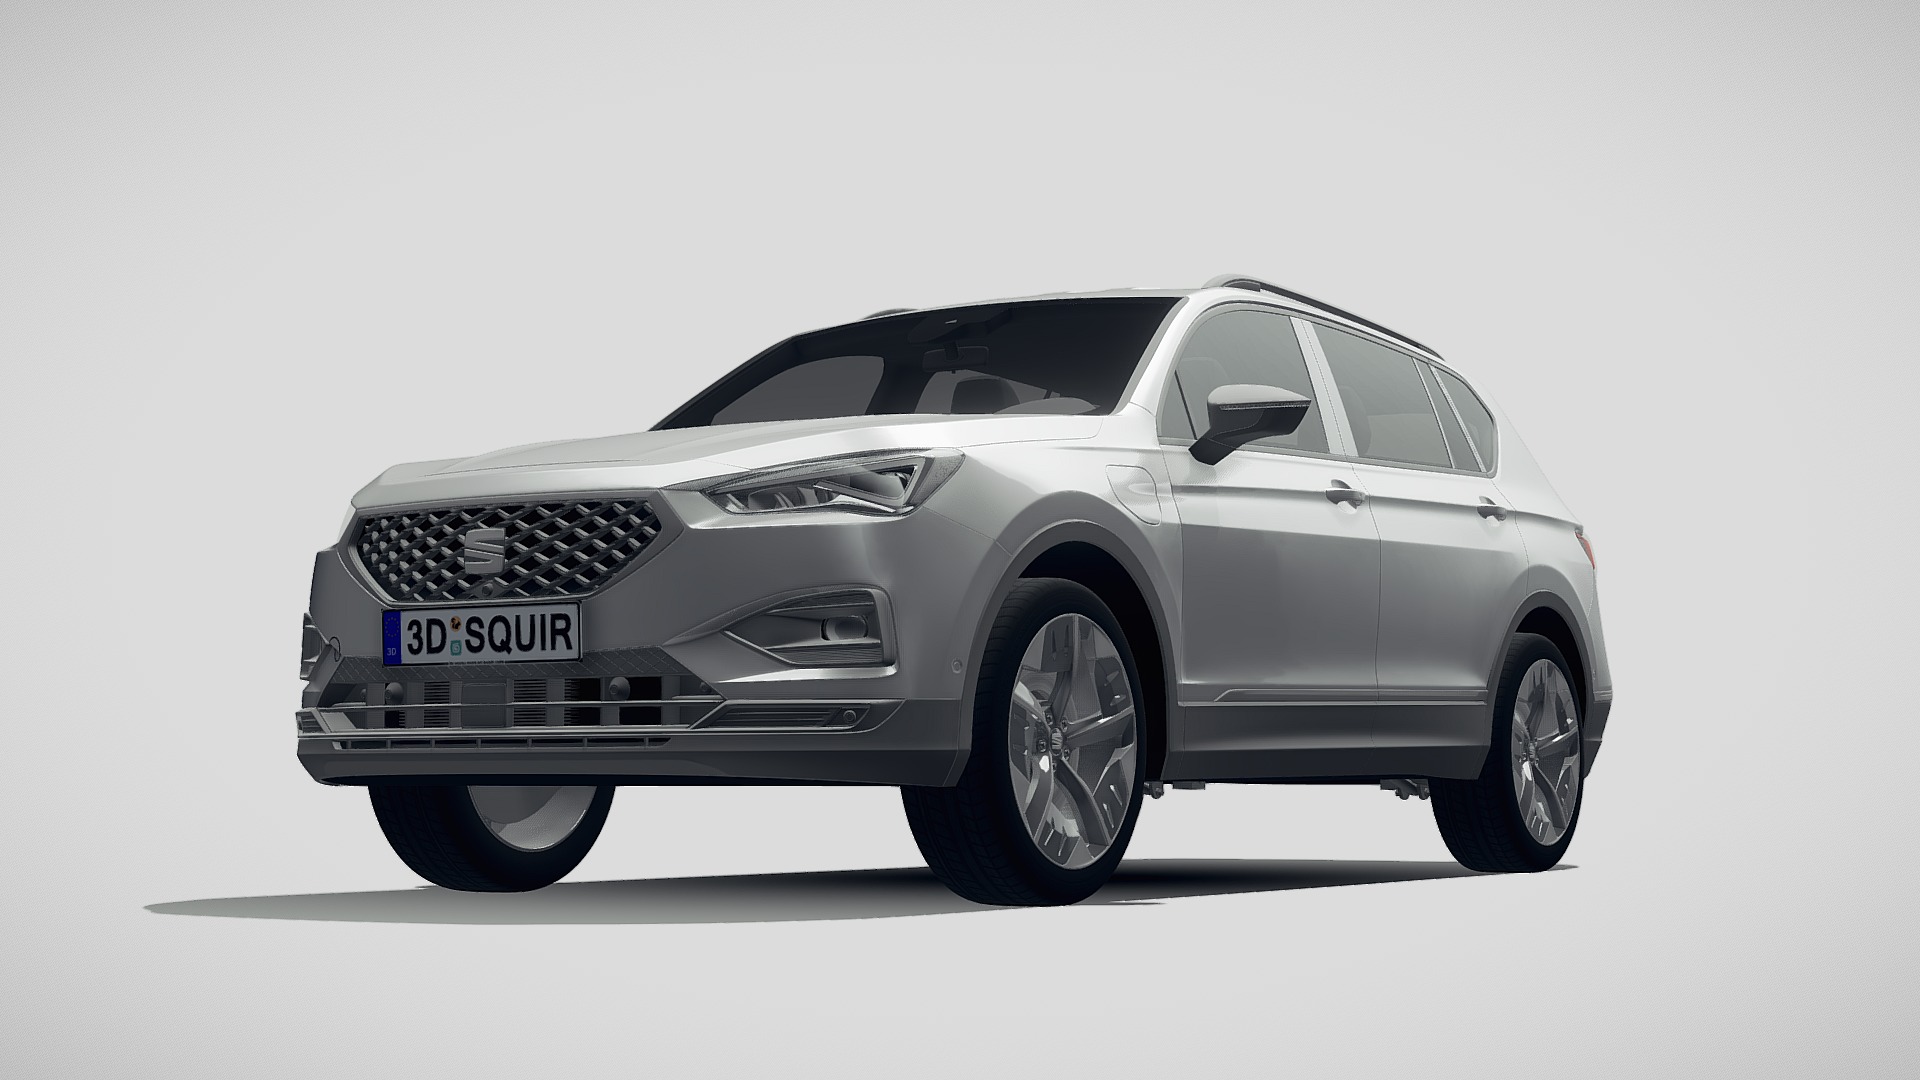 3D model Seat Tarraco PHEV 2020 Fbx - This is a 3D model of the Seat Tarraco PHEV 2020 Fbx. The 3D model is about a silver car with a white background.